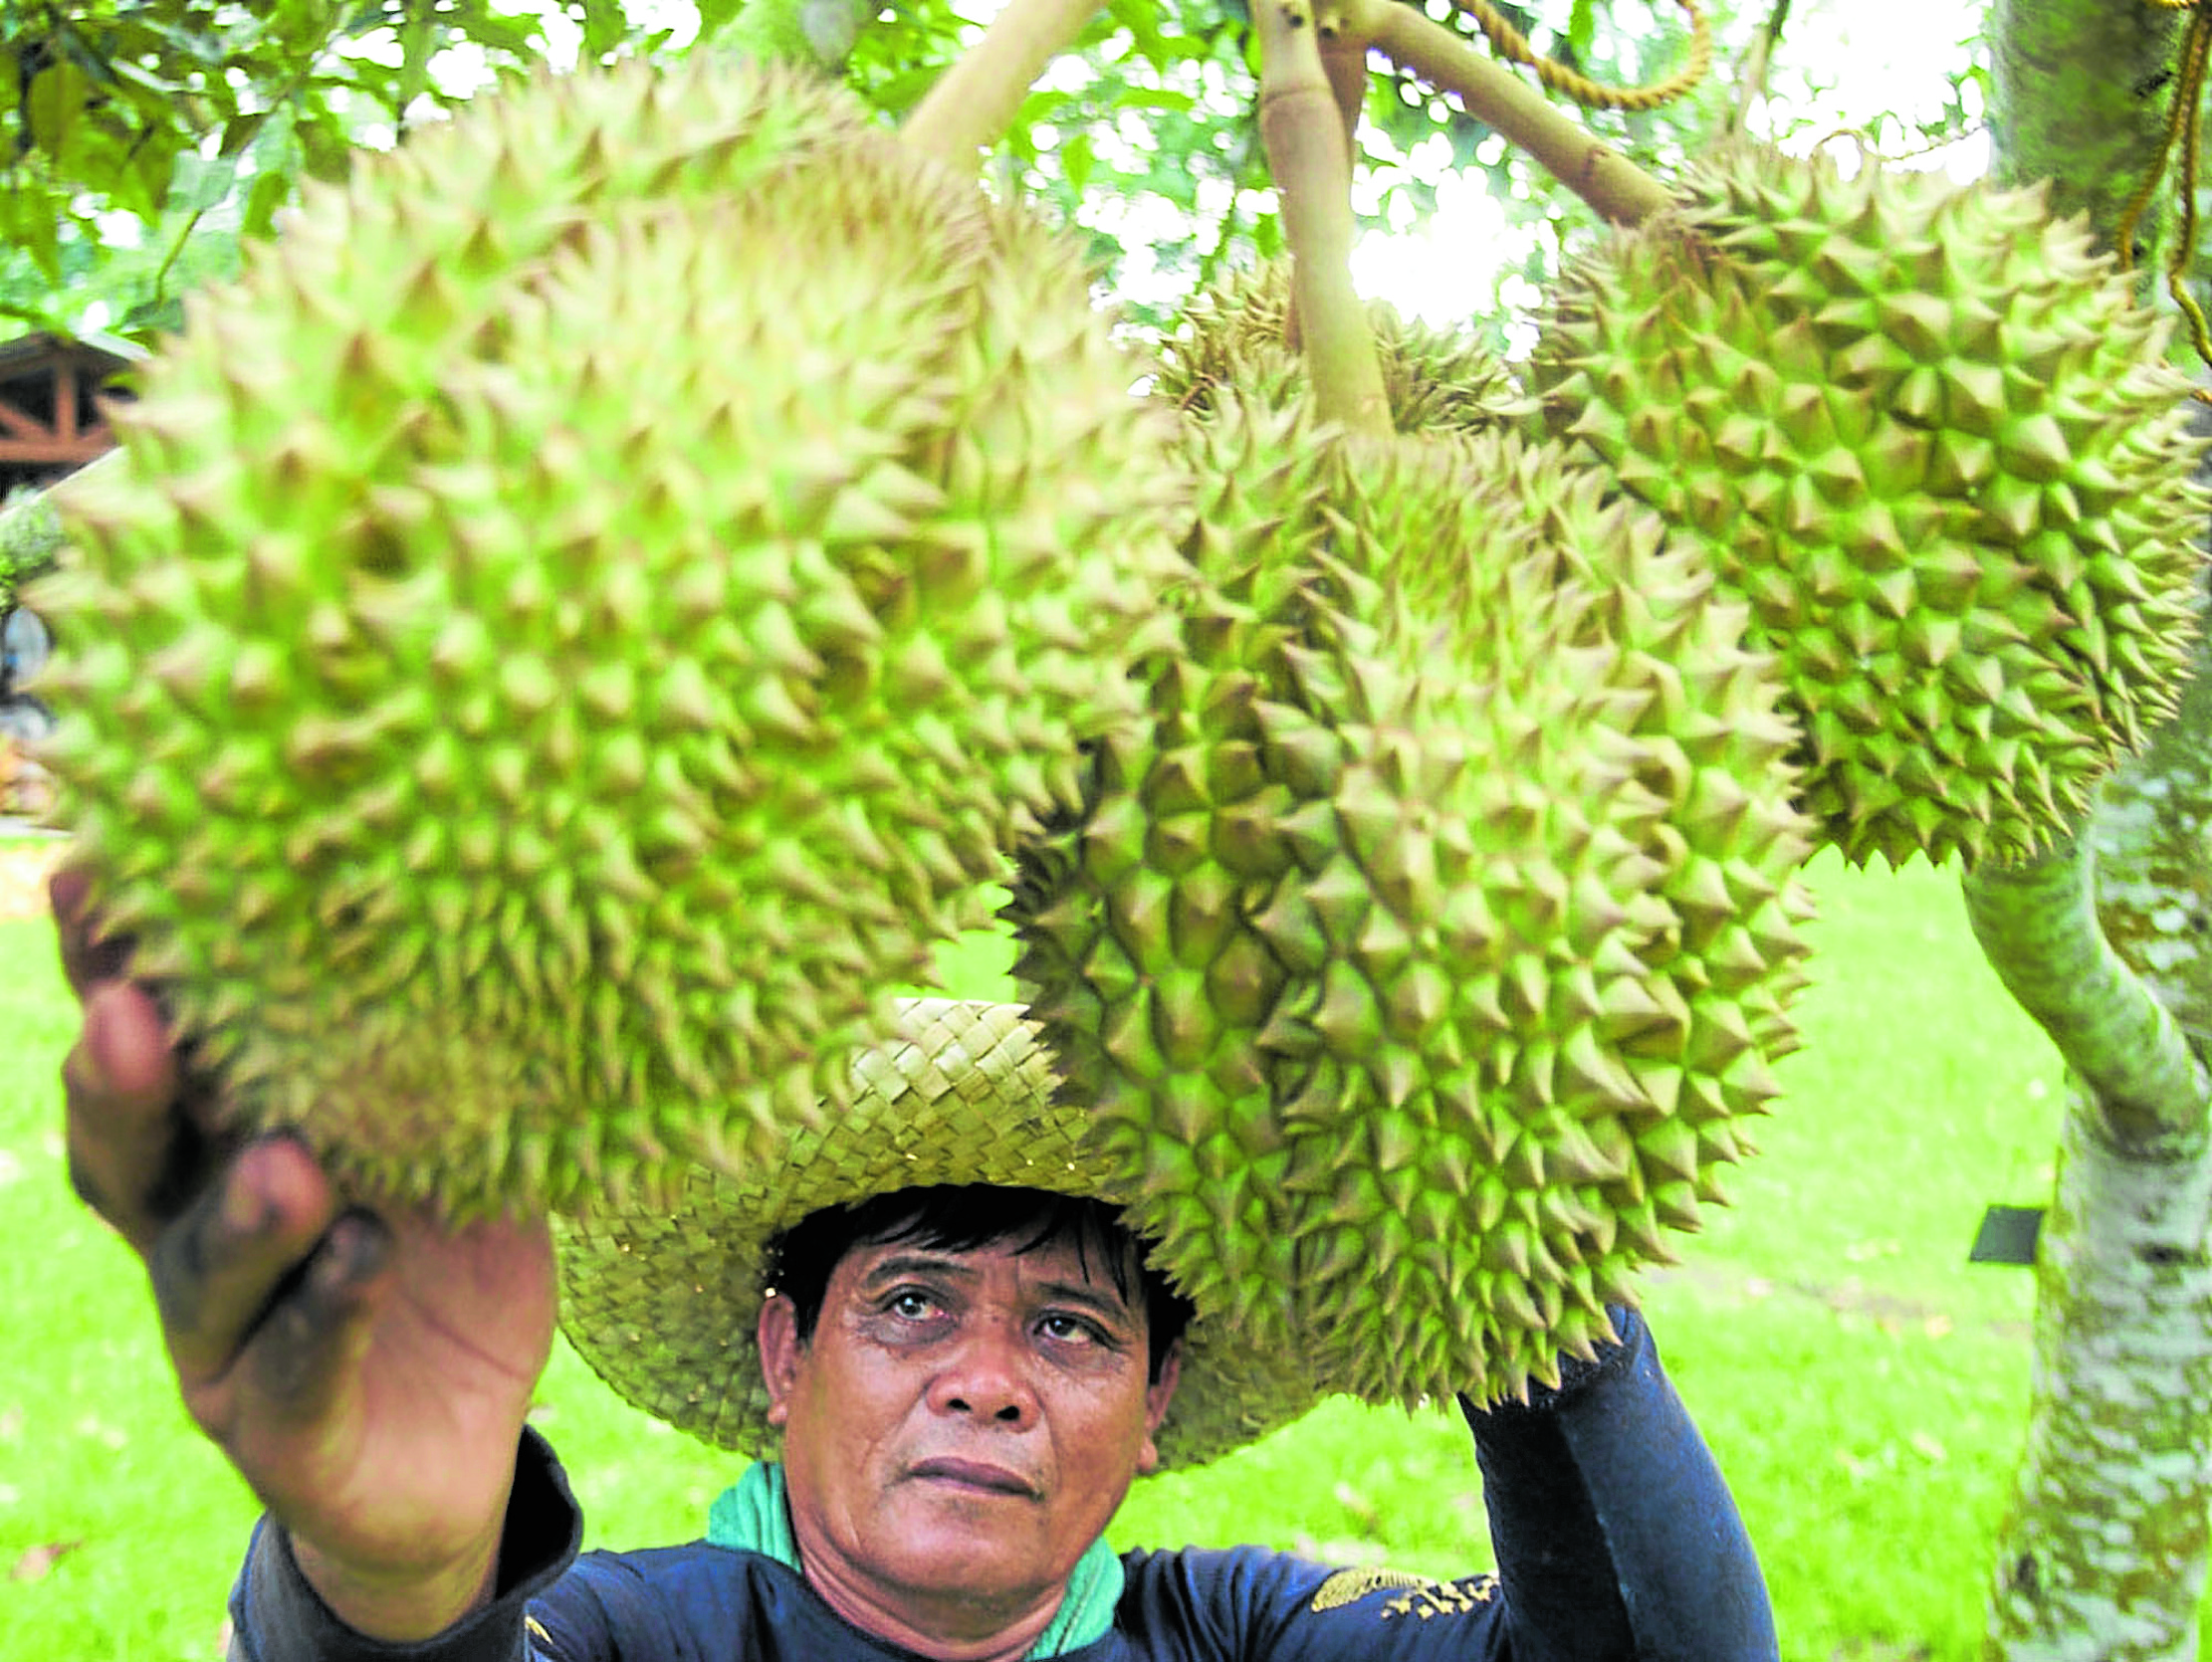 The Davaoregion, the country’s main source of durian, has reason to cheer, according to the President